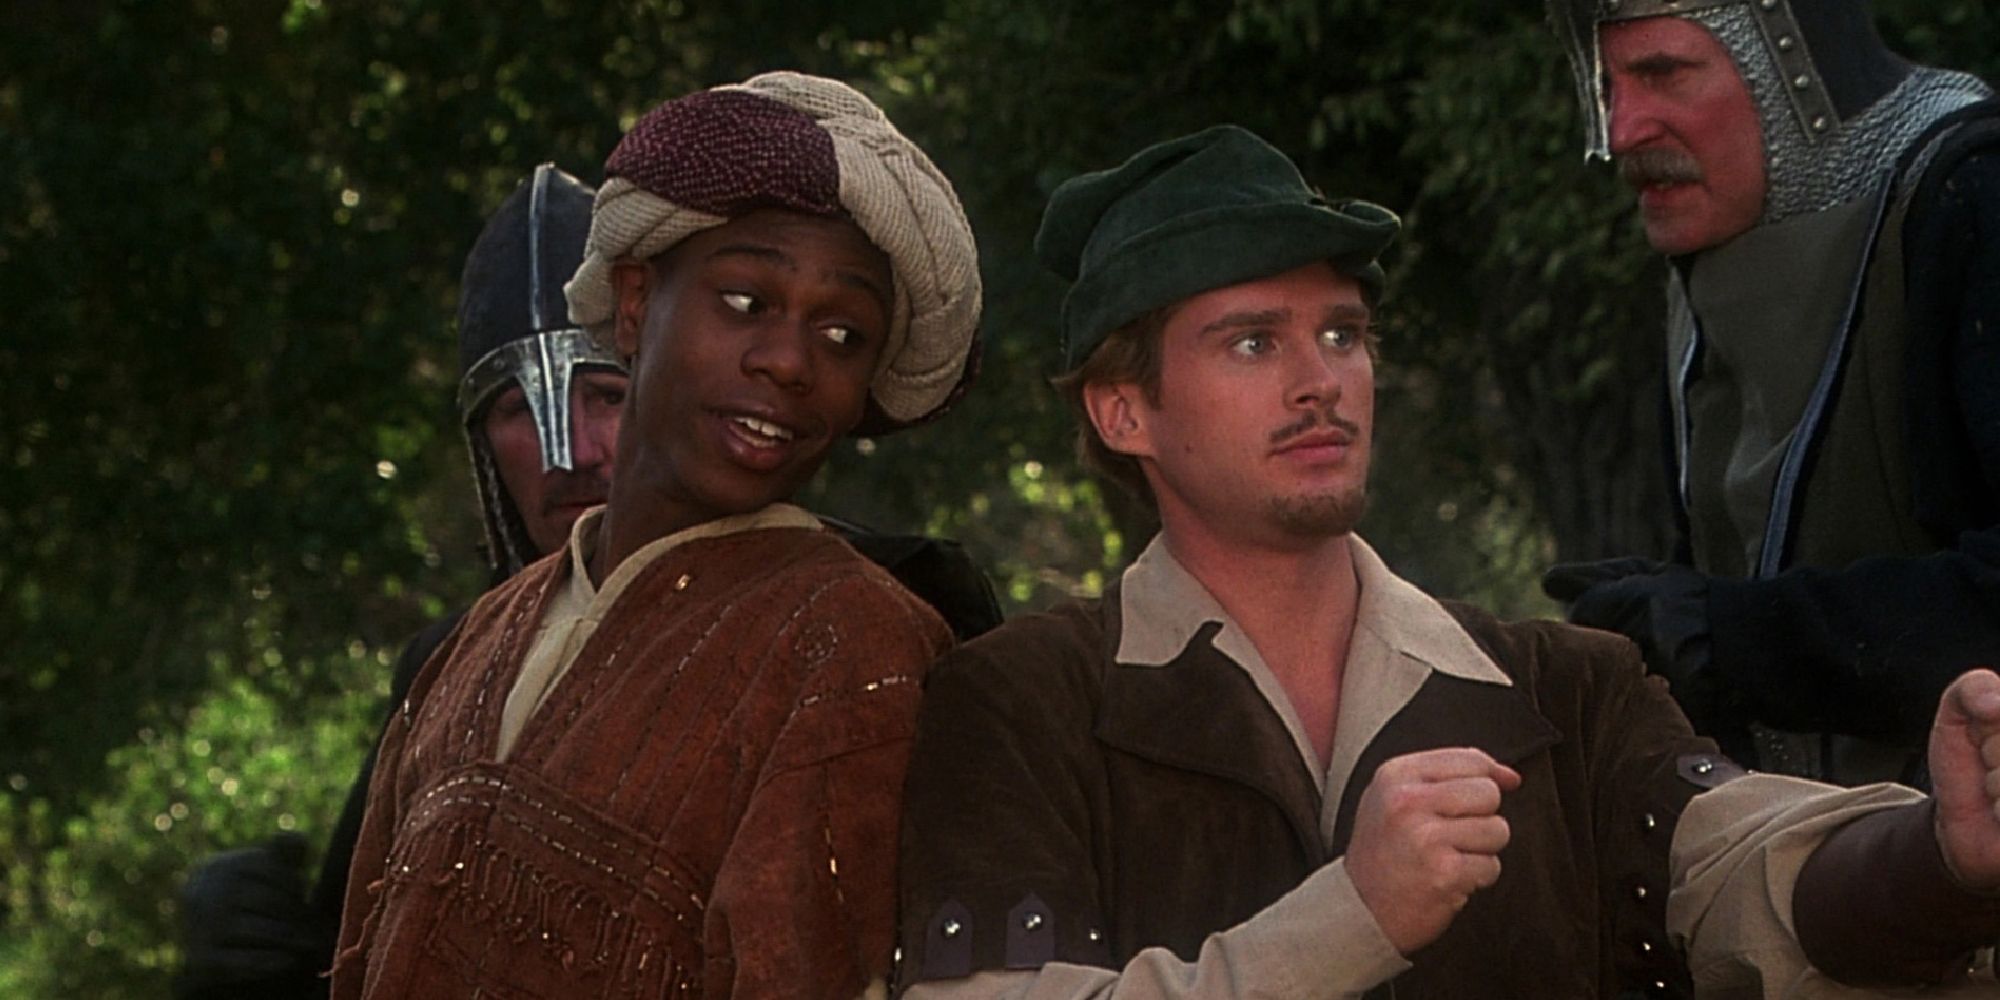 Dave Chappelle and Cary Elwes in Robin Hood